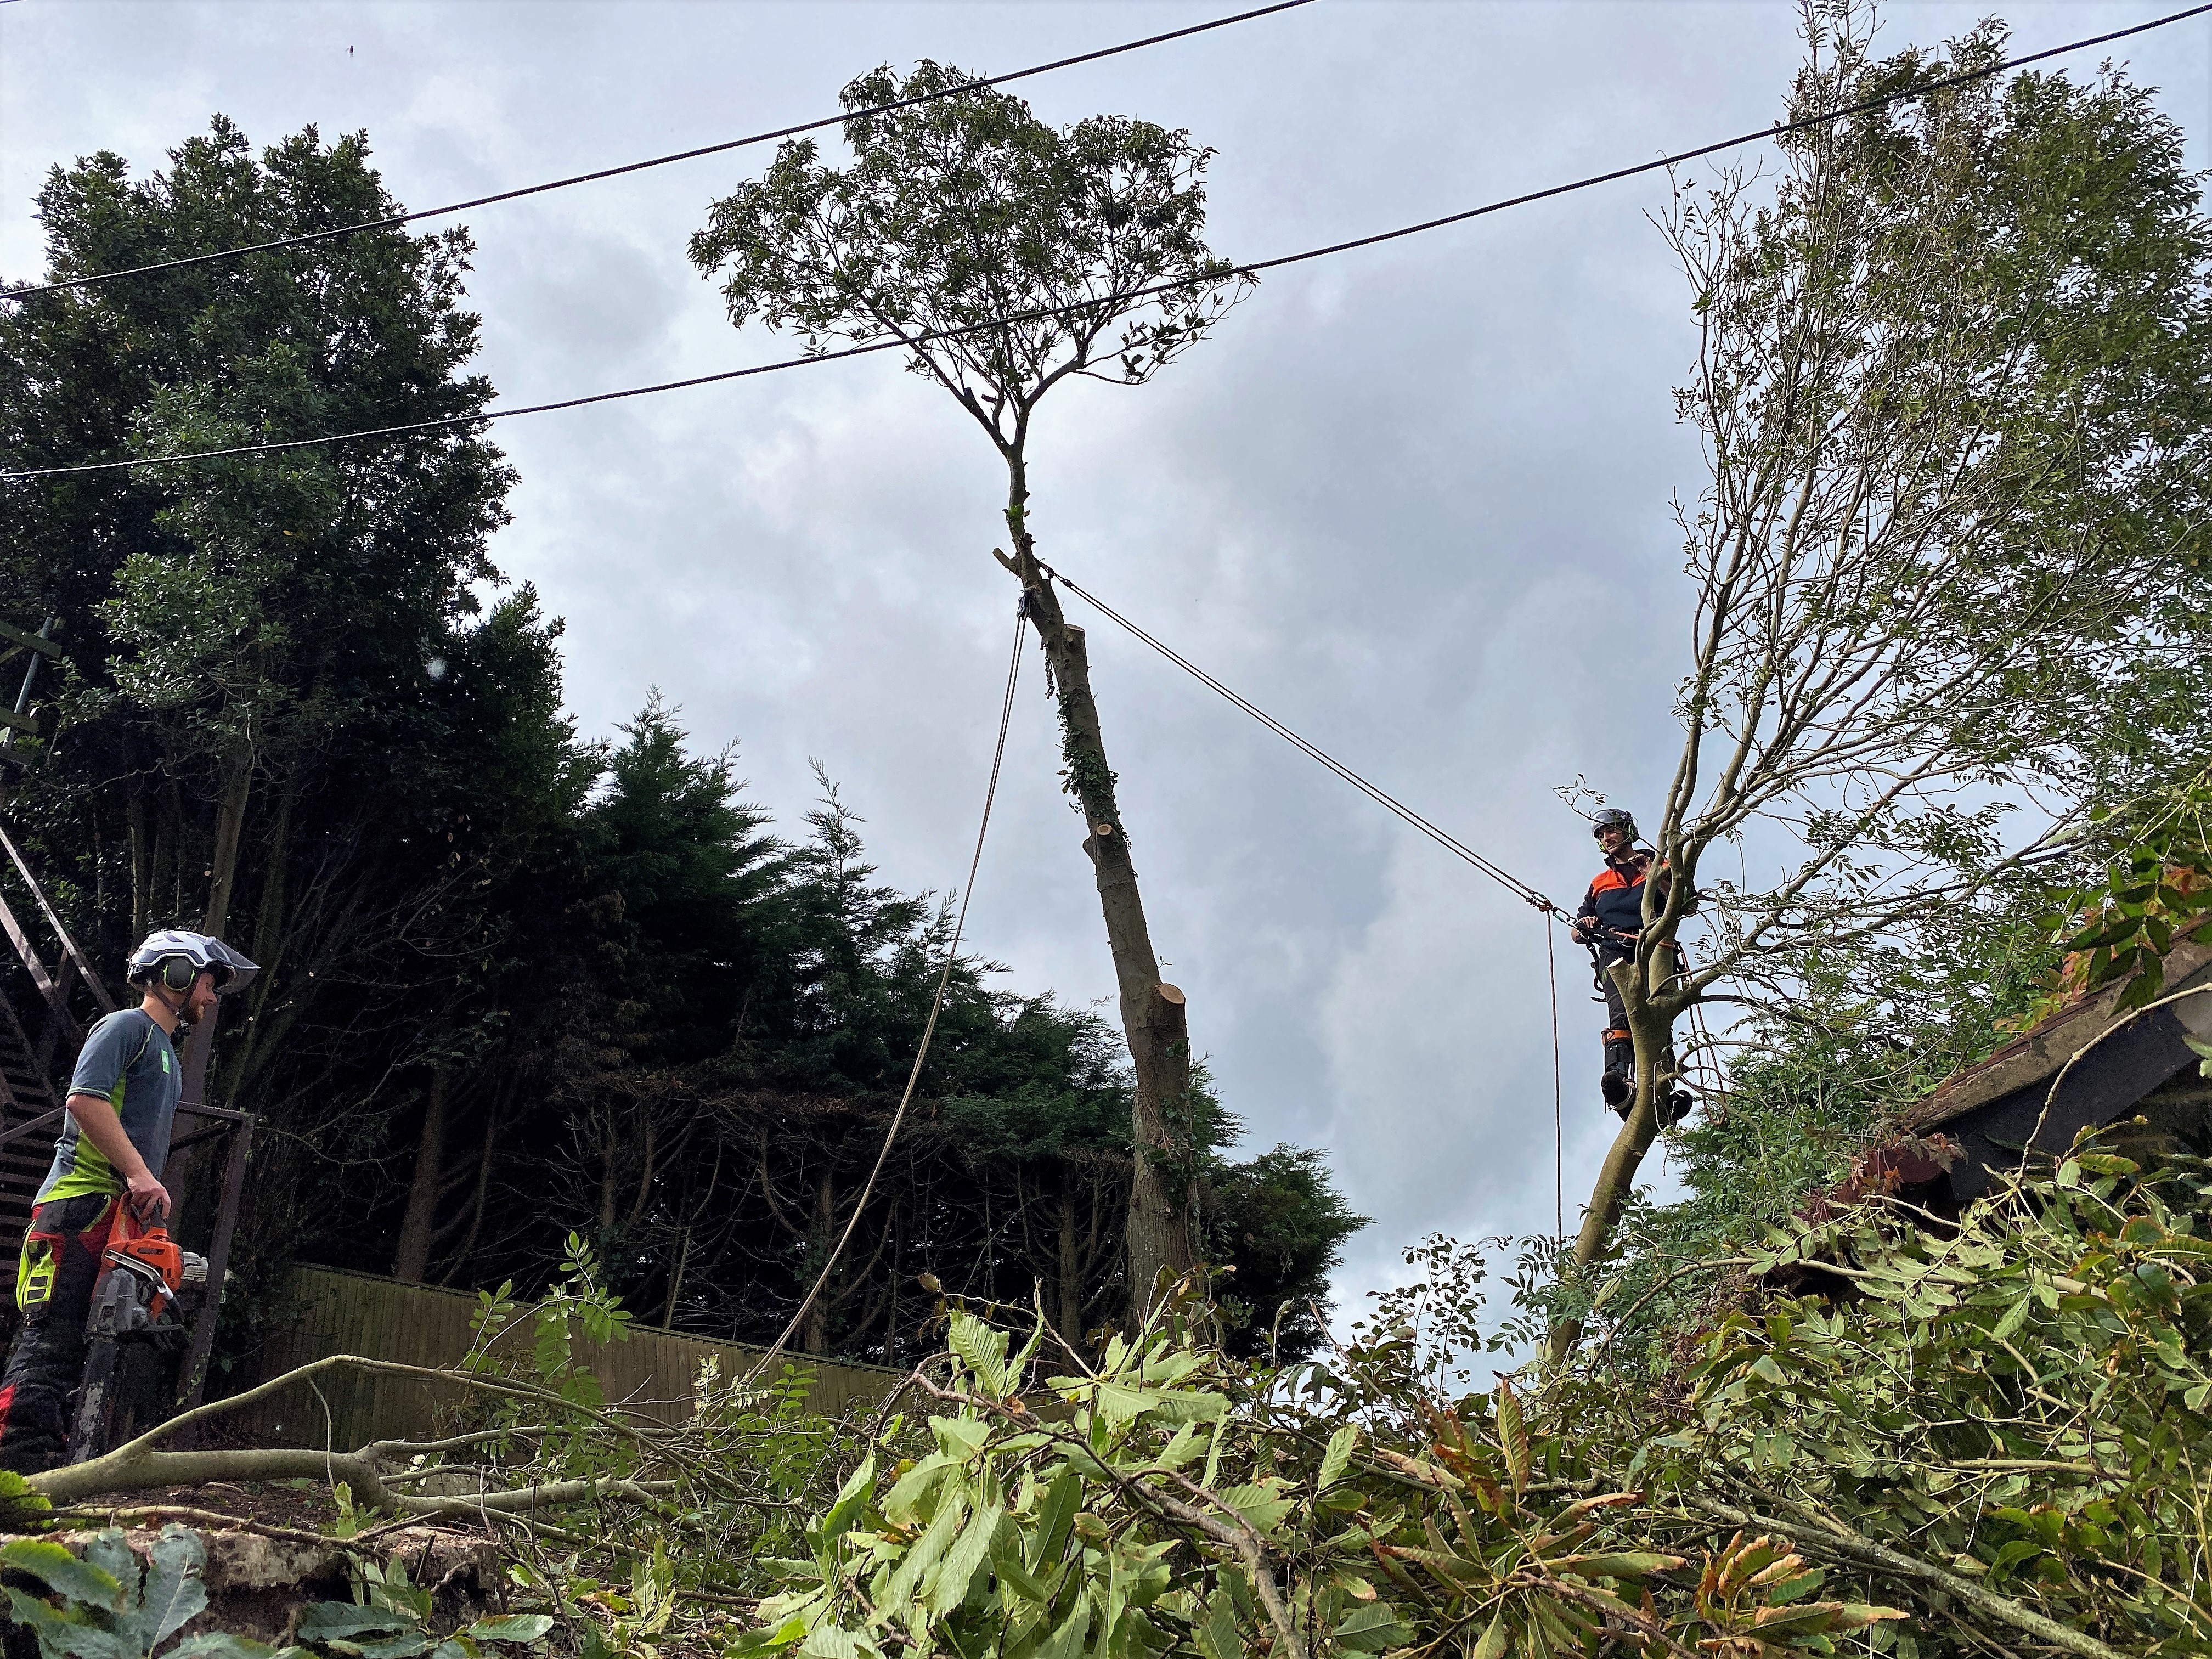 Tree Care in Weymouth, Dorchester, Portland in Dorset by Weymouth tree surgeon team at Dorset Treeworx Ltd - Tree surgery, tree care, tree removal, hedge trimming, stump grinding services